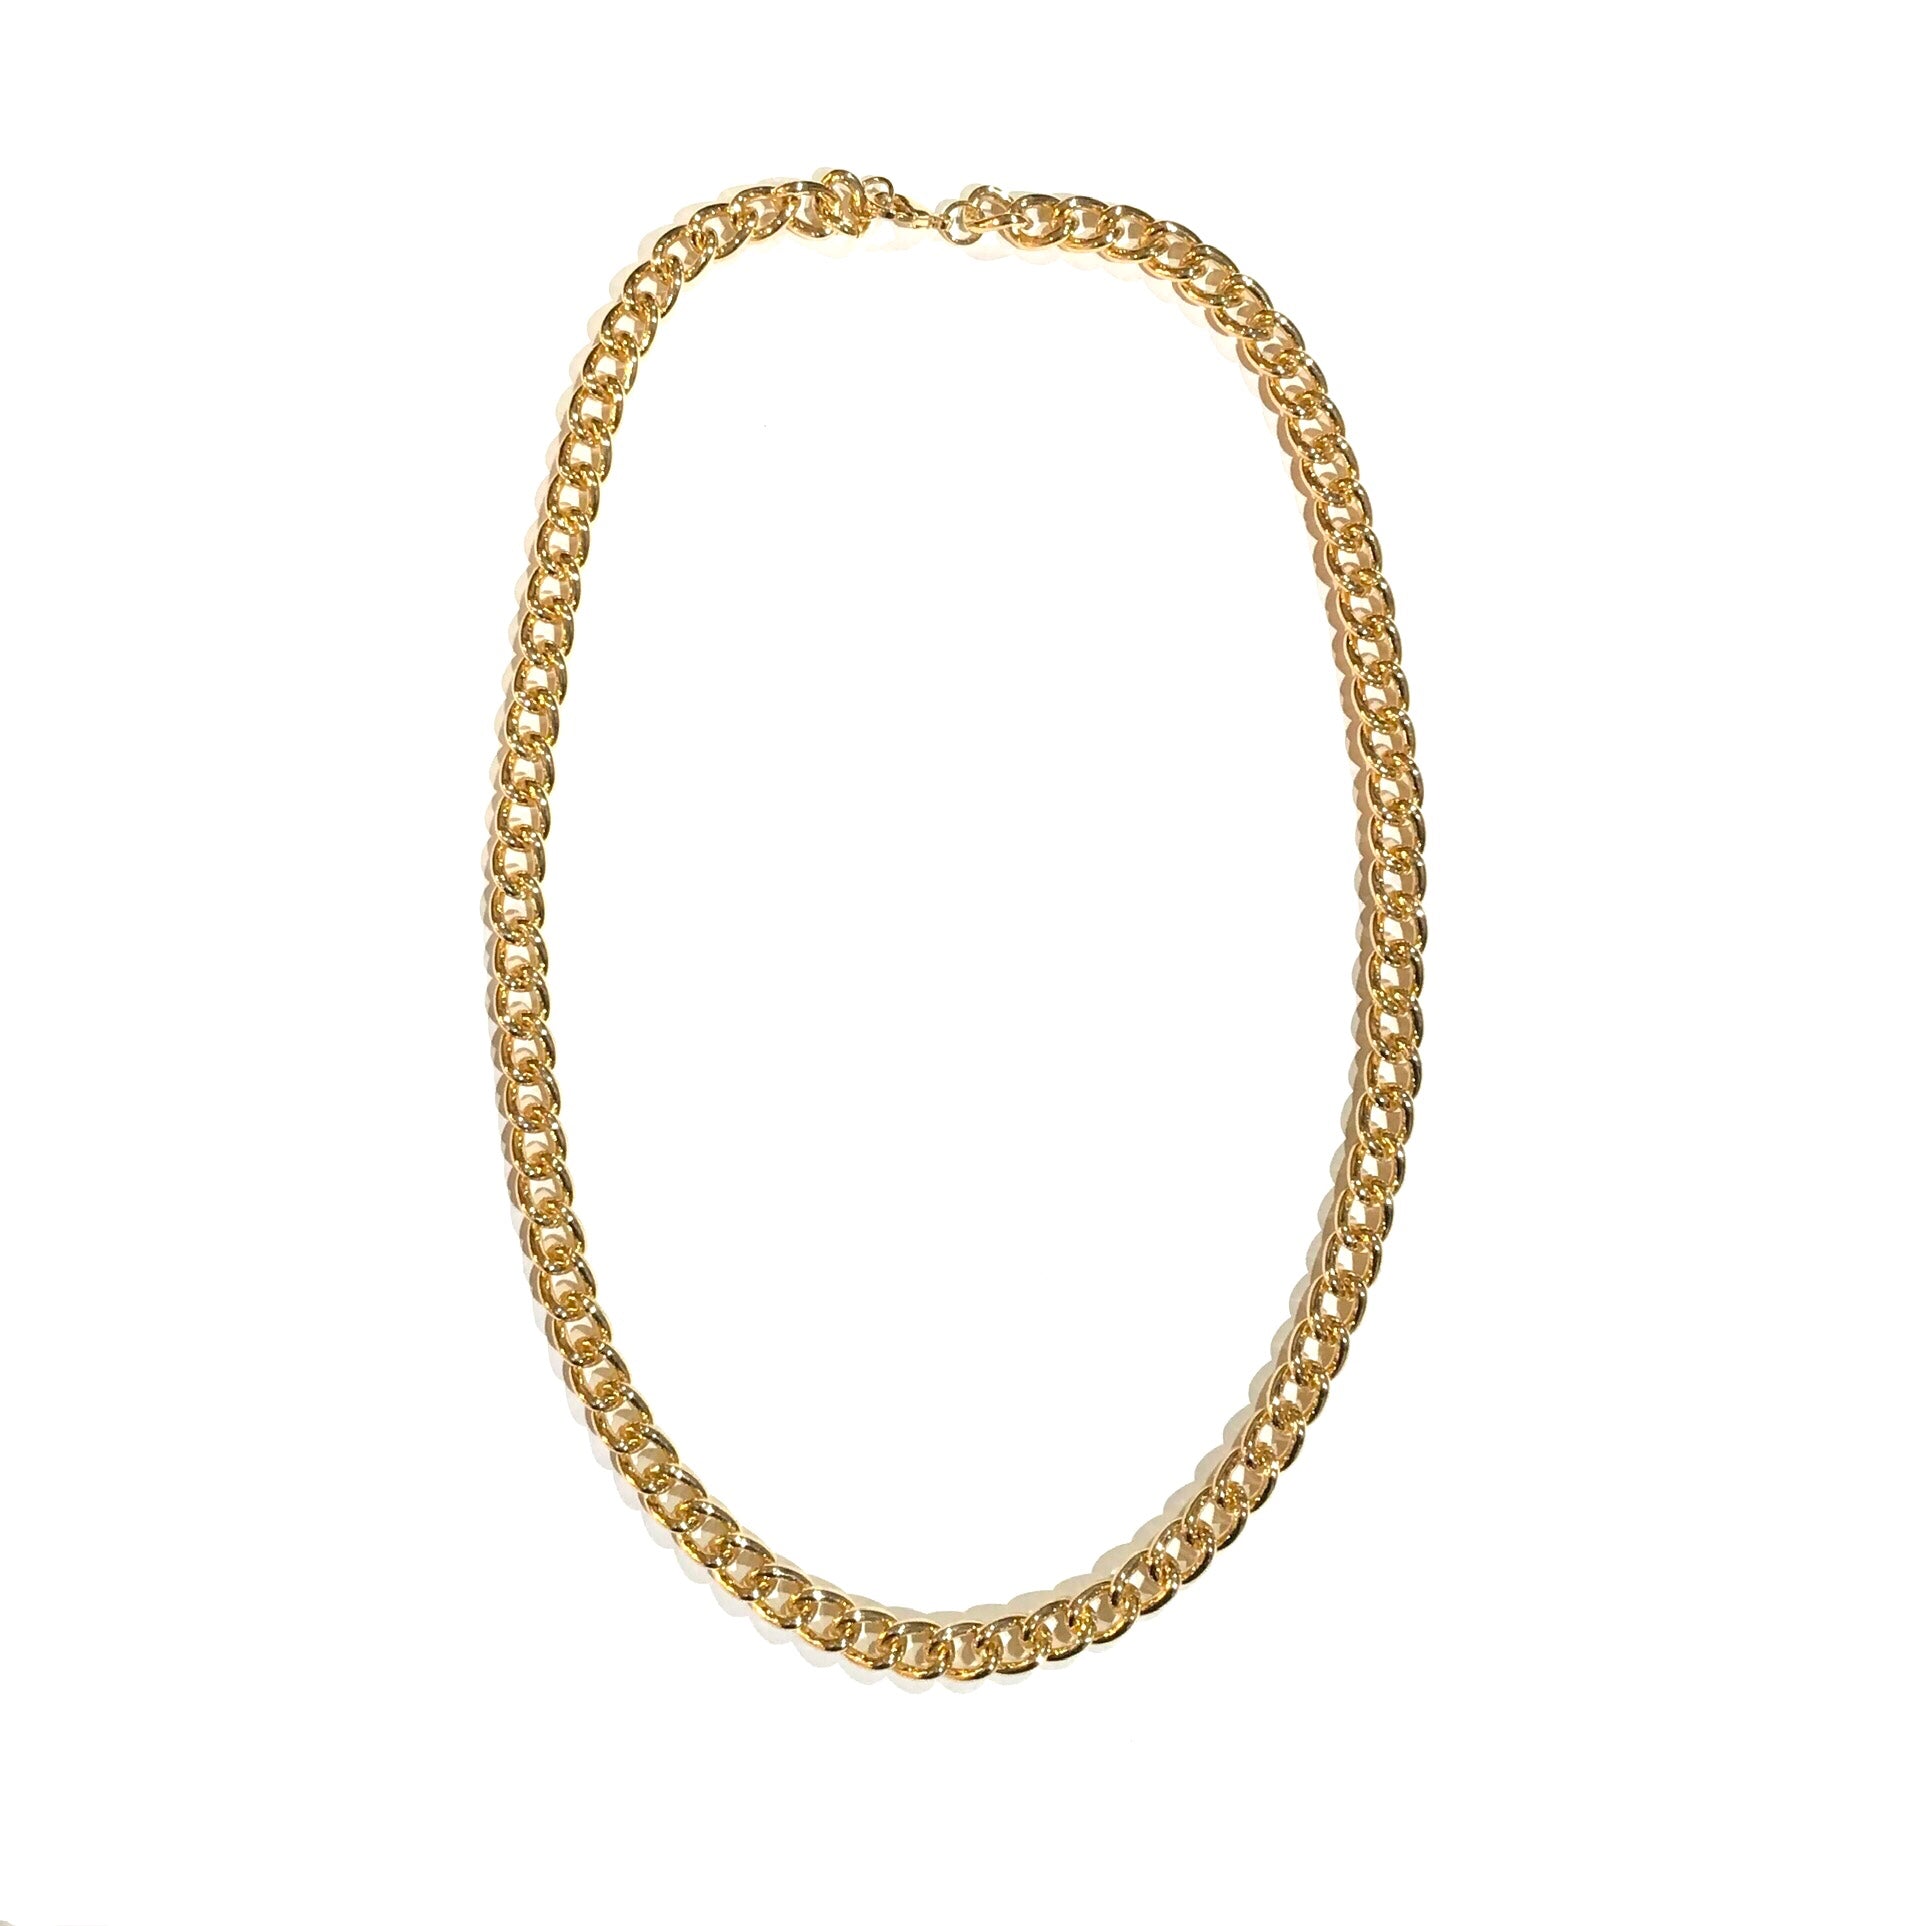 Gold Filled 20” Cuban Chain Necklace